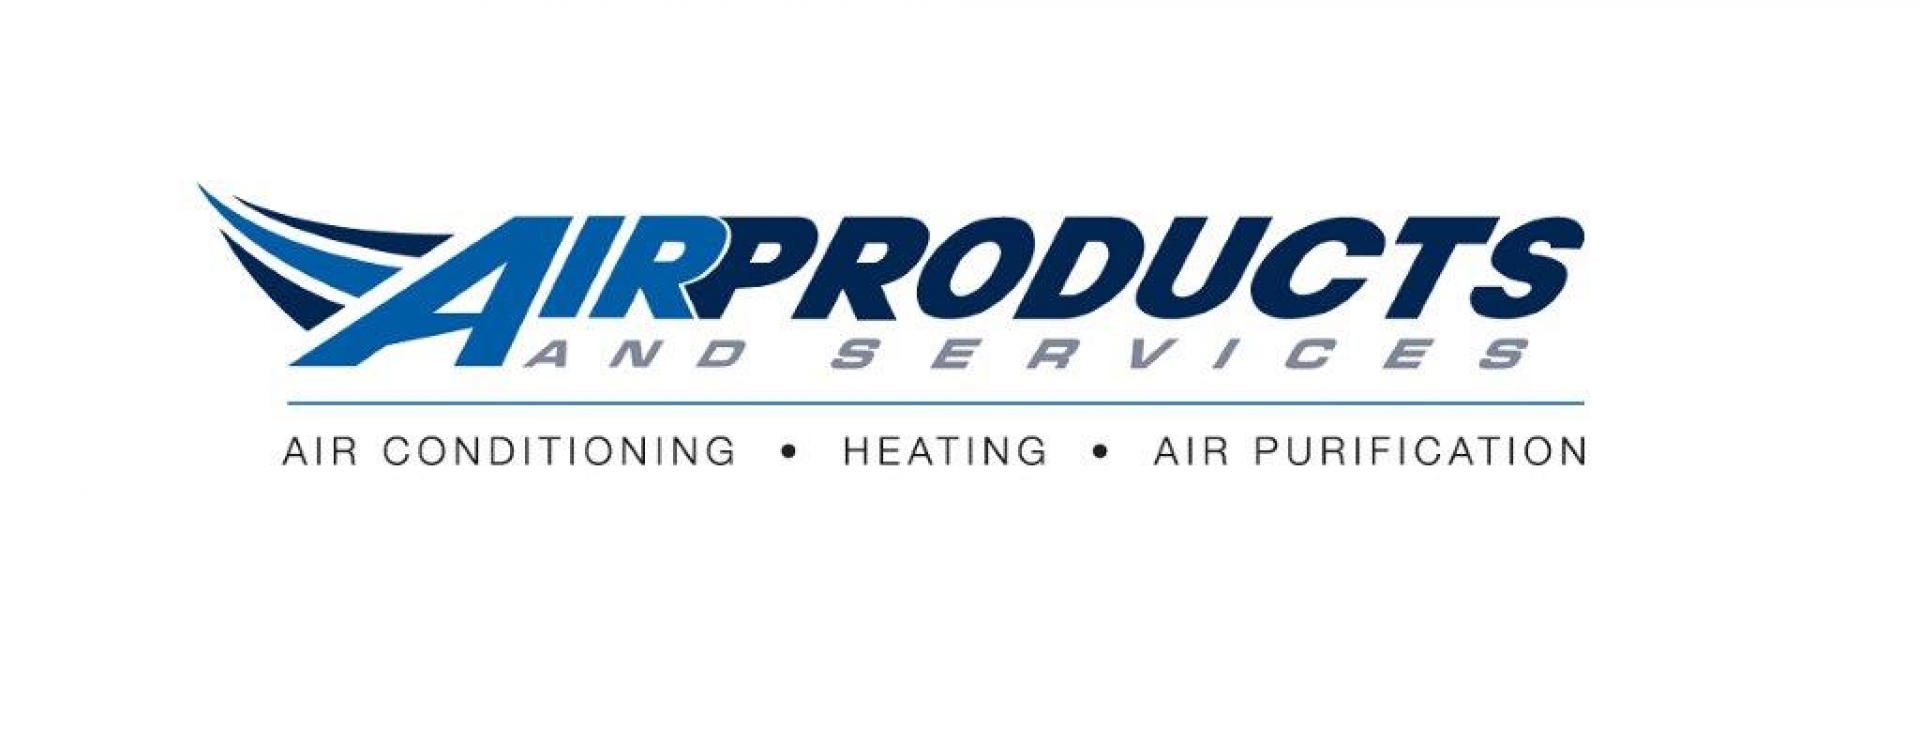 Air Products & Services company logo